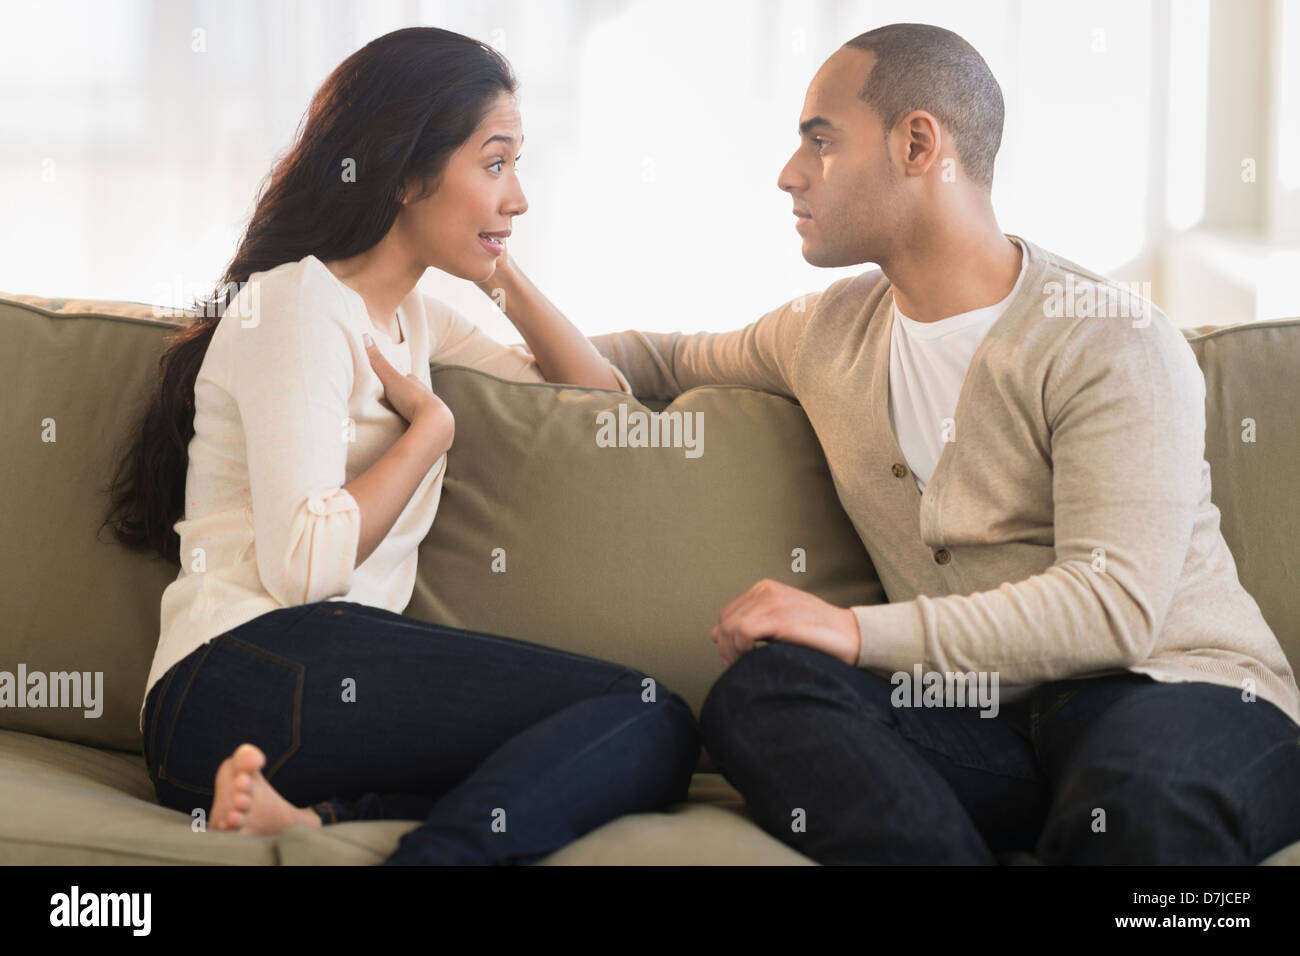 Young couple sitting on couch Banque D'Images